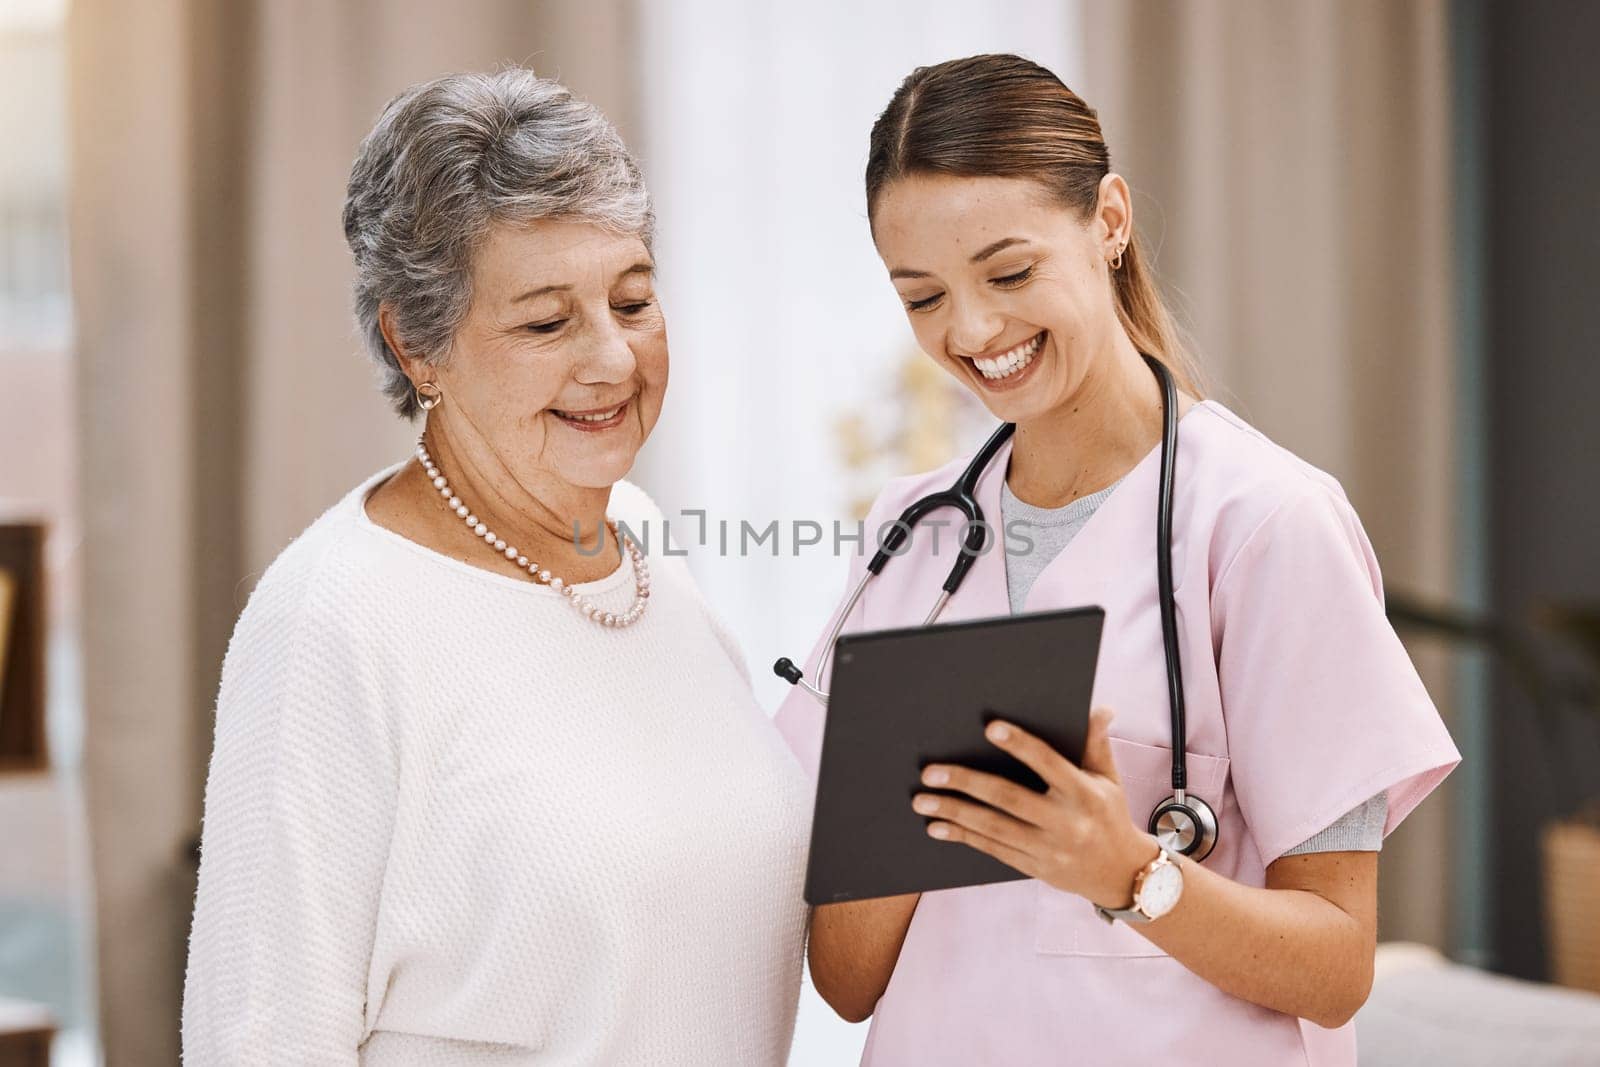 Tablet, healthcare and nurse with senior woman for digital help, support or wellness check, data and results together with smile. Happy elderly patient in communication with medical worker or doctor by YuriArcurs